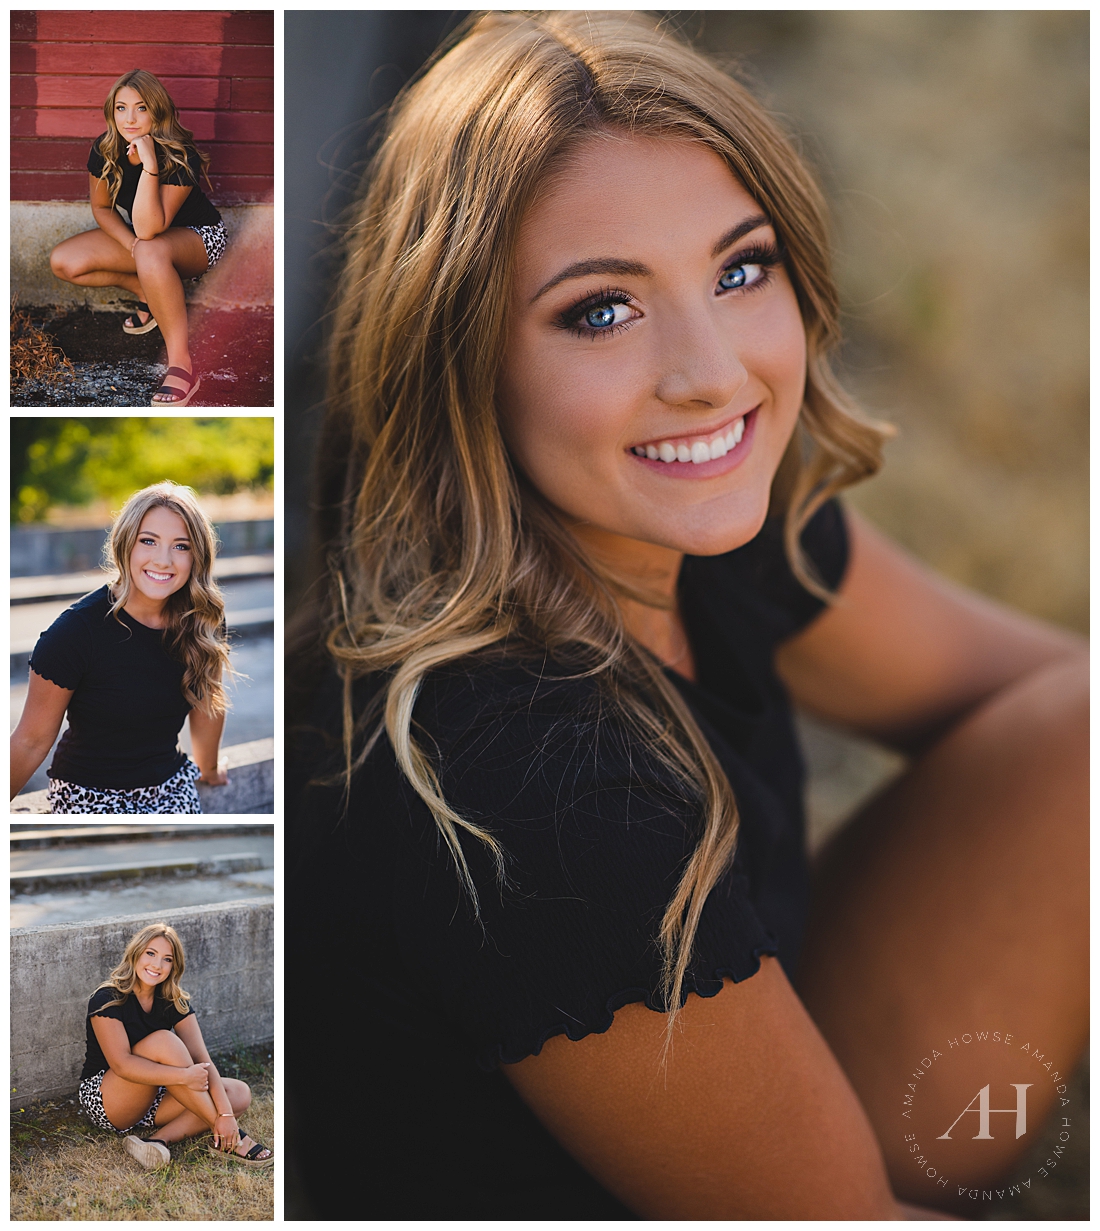 Volleyball Player Senior Portraits | Outdoor Washington Portraits at Fort Steilacoom, Rustic Senior Portraits, How to Dress for Summer Portraits, VSCO Girl, Casual Style | Photographed by the Best Tacoma Senior Photographer Amanda Howse